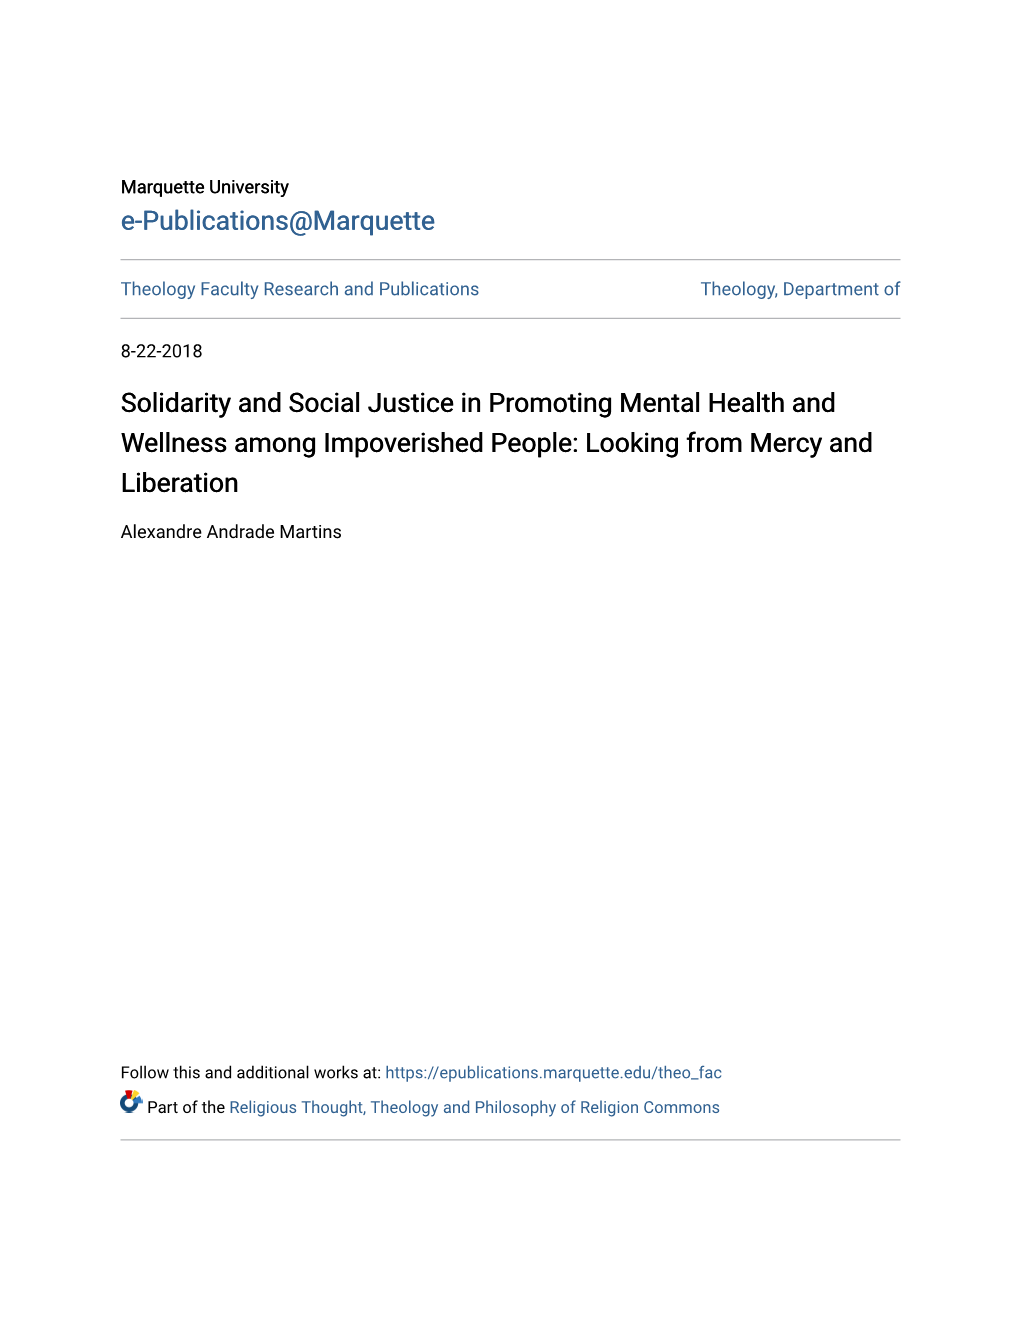 Solidarity and Social Justice in Promoting Mental Health and Wellness Among Impoverished People: Looking from Mercy and Liberation